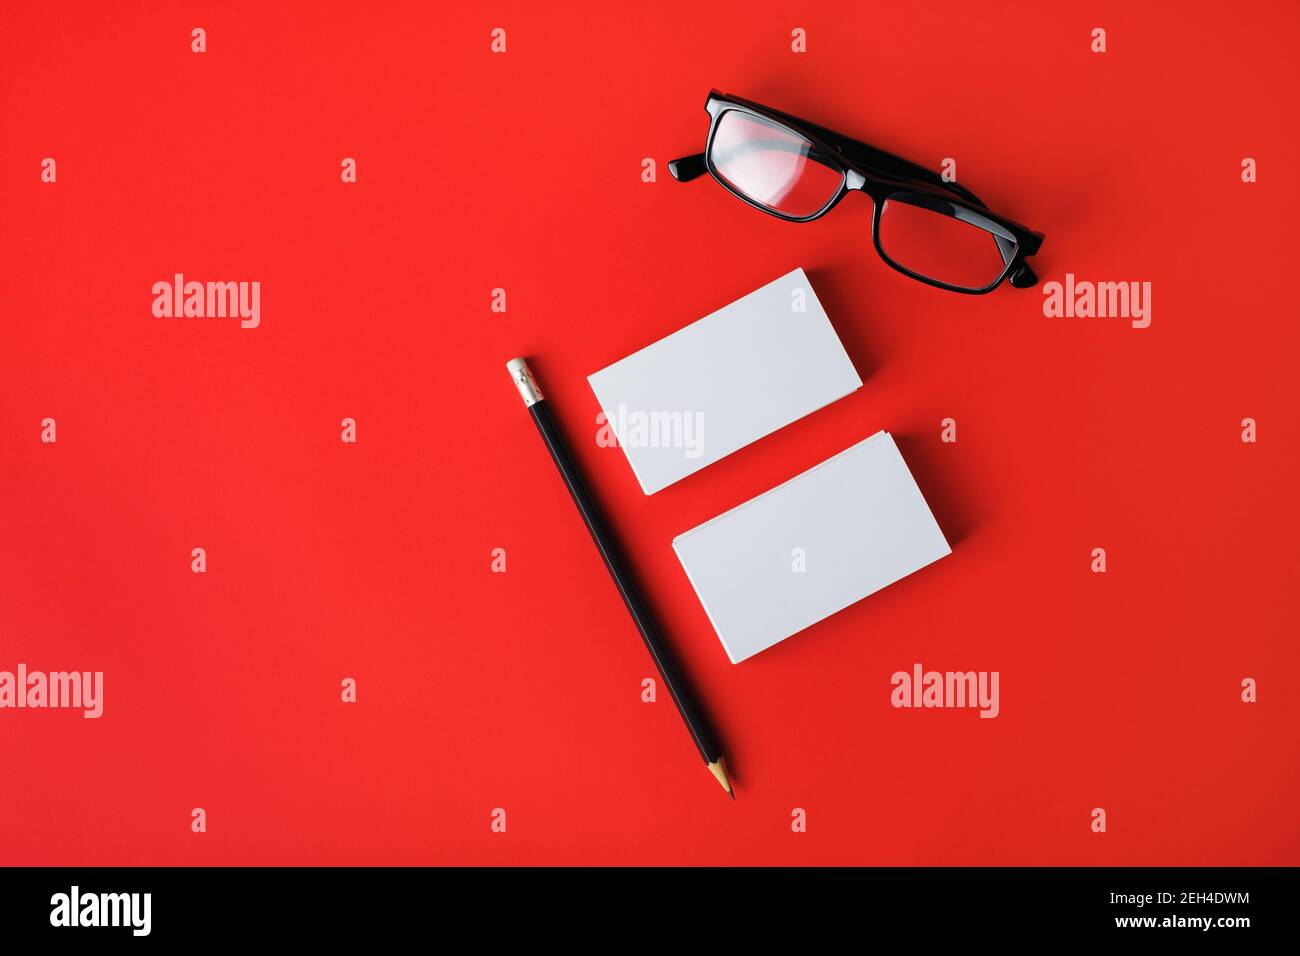 Blank business cards, pencil and glasses on red background. Mock-up for branding identity. Top view. Flat lay. Stock Photo